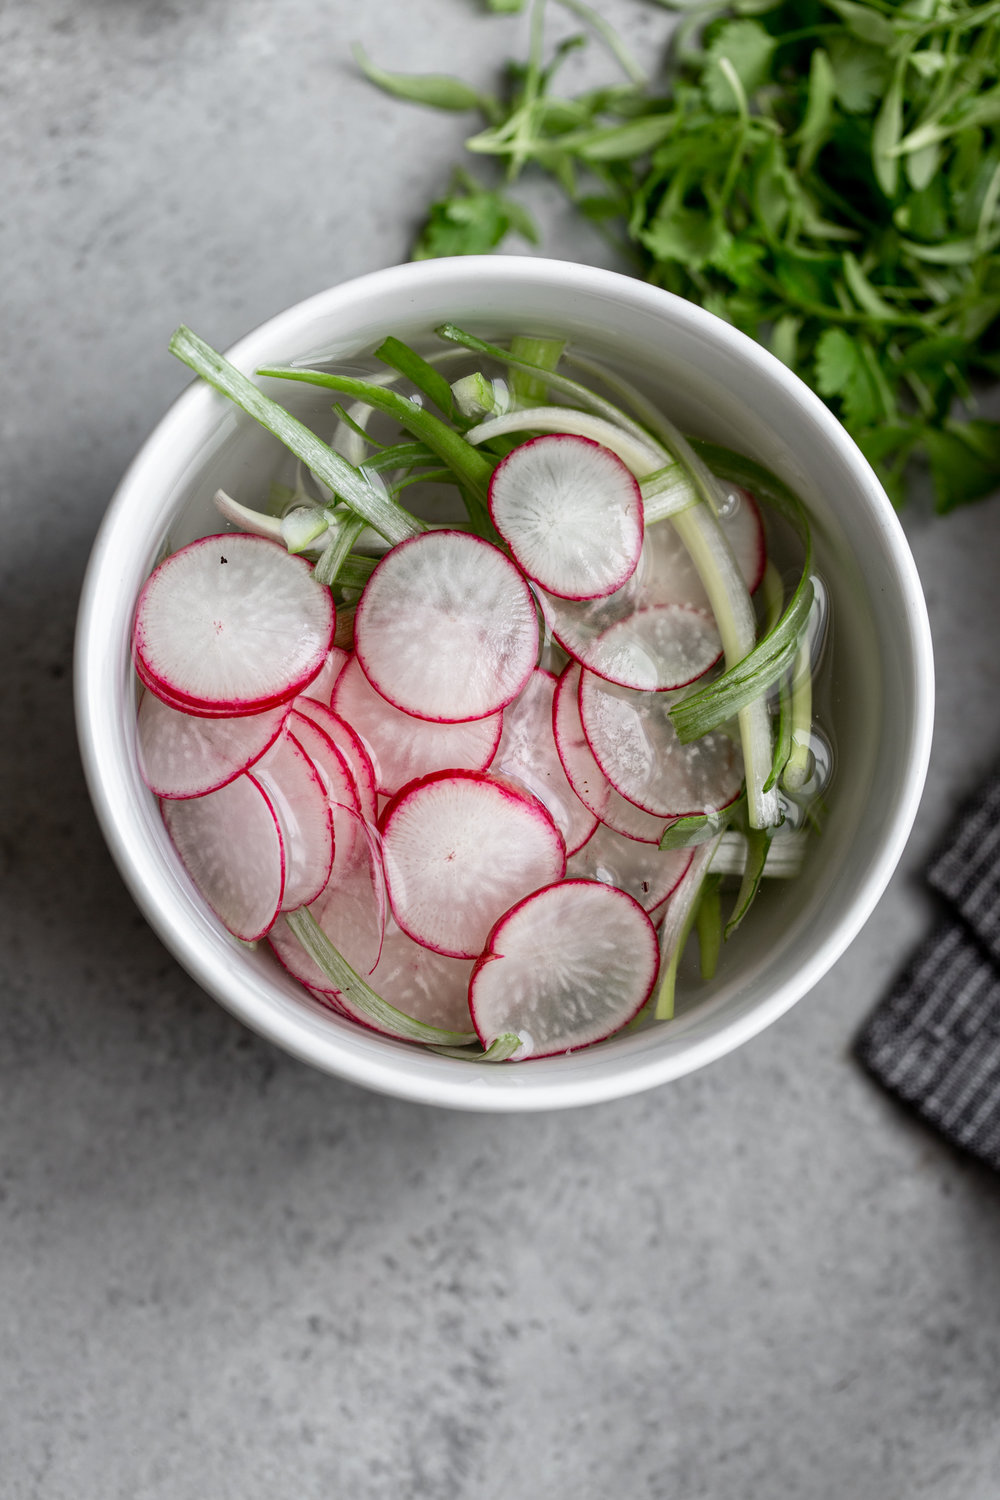 thinly sliced radish and green onion in water